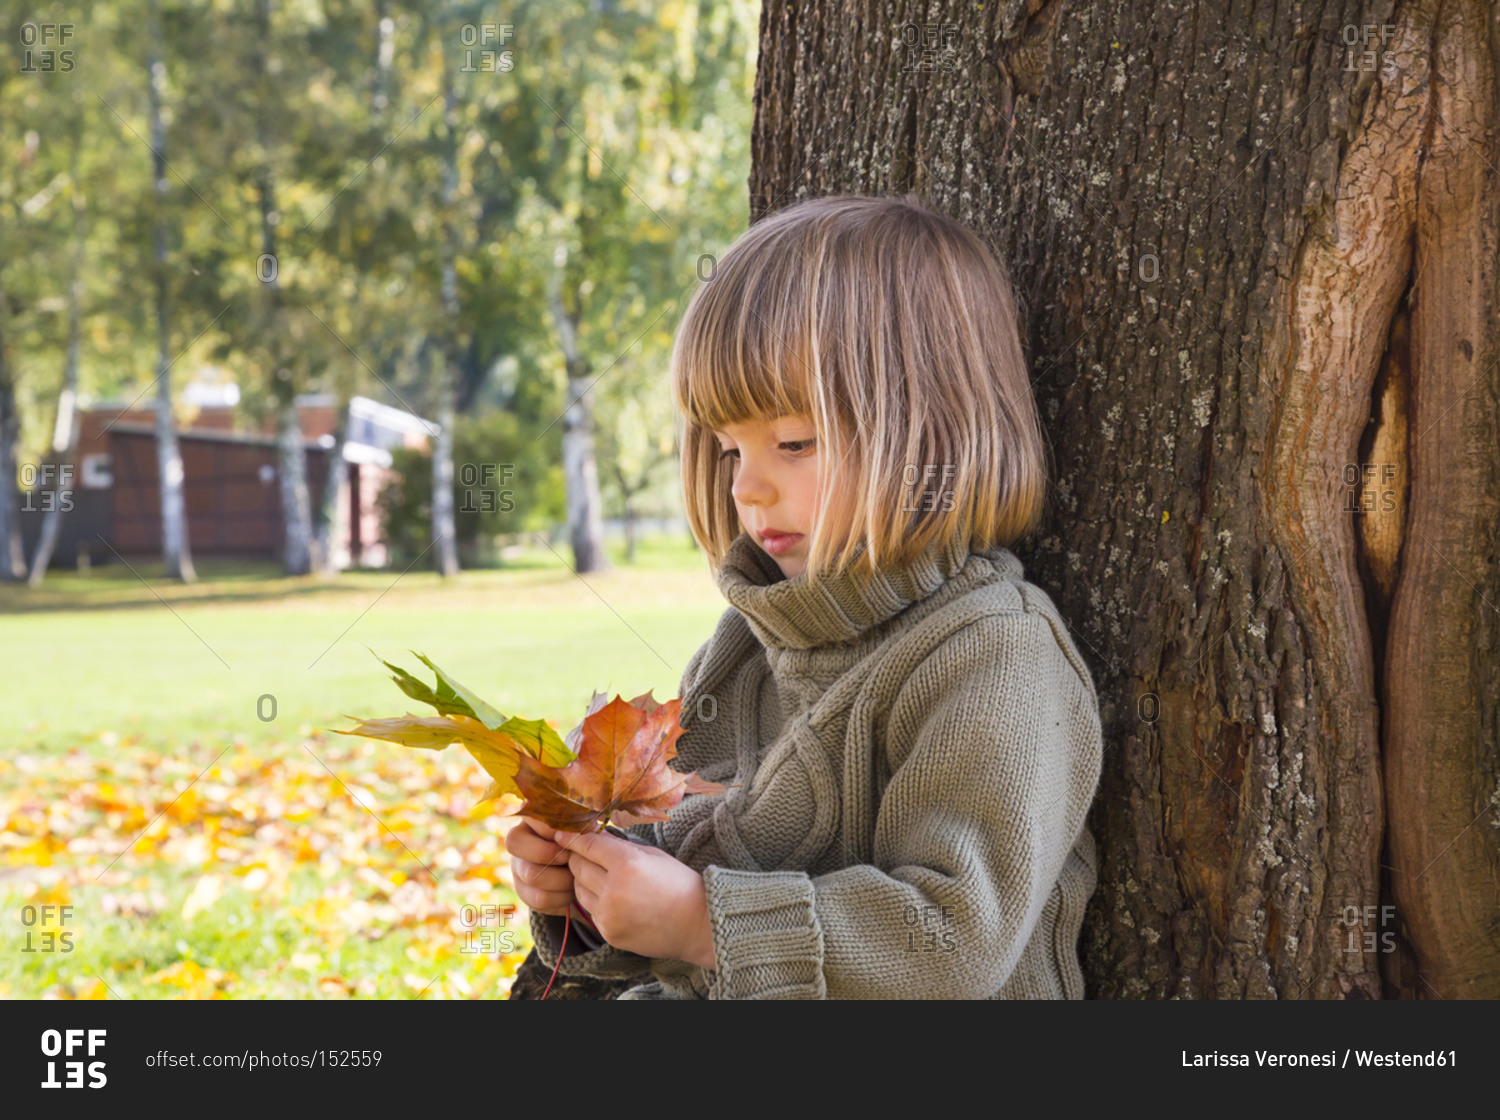 Little girl leaning at tree trunk looking at bunch of autumn leaves in her hands